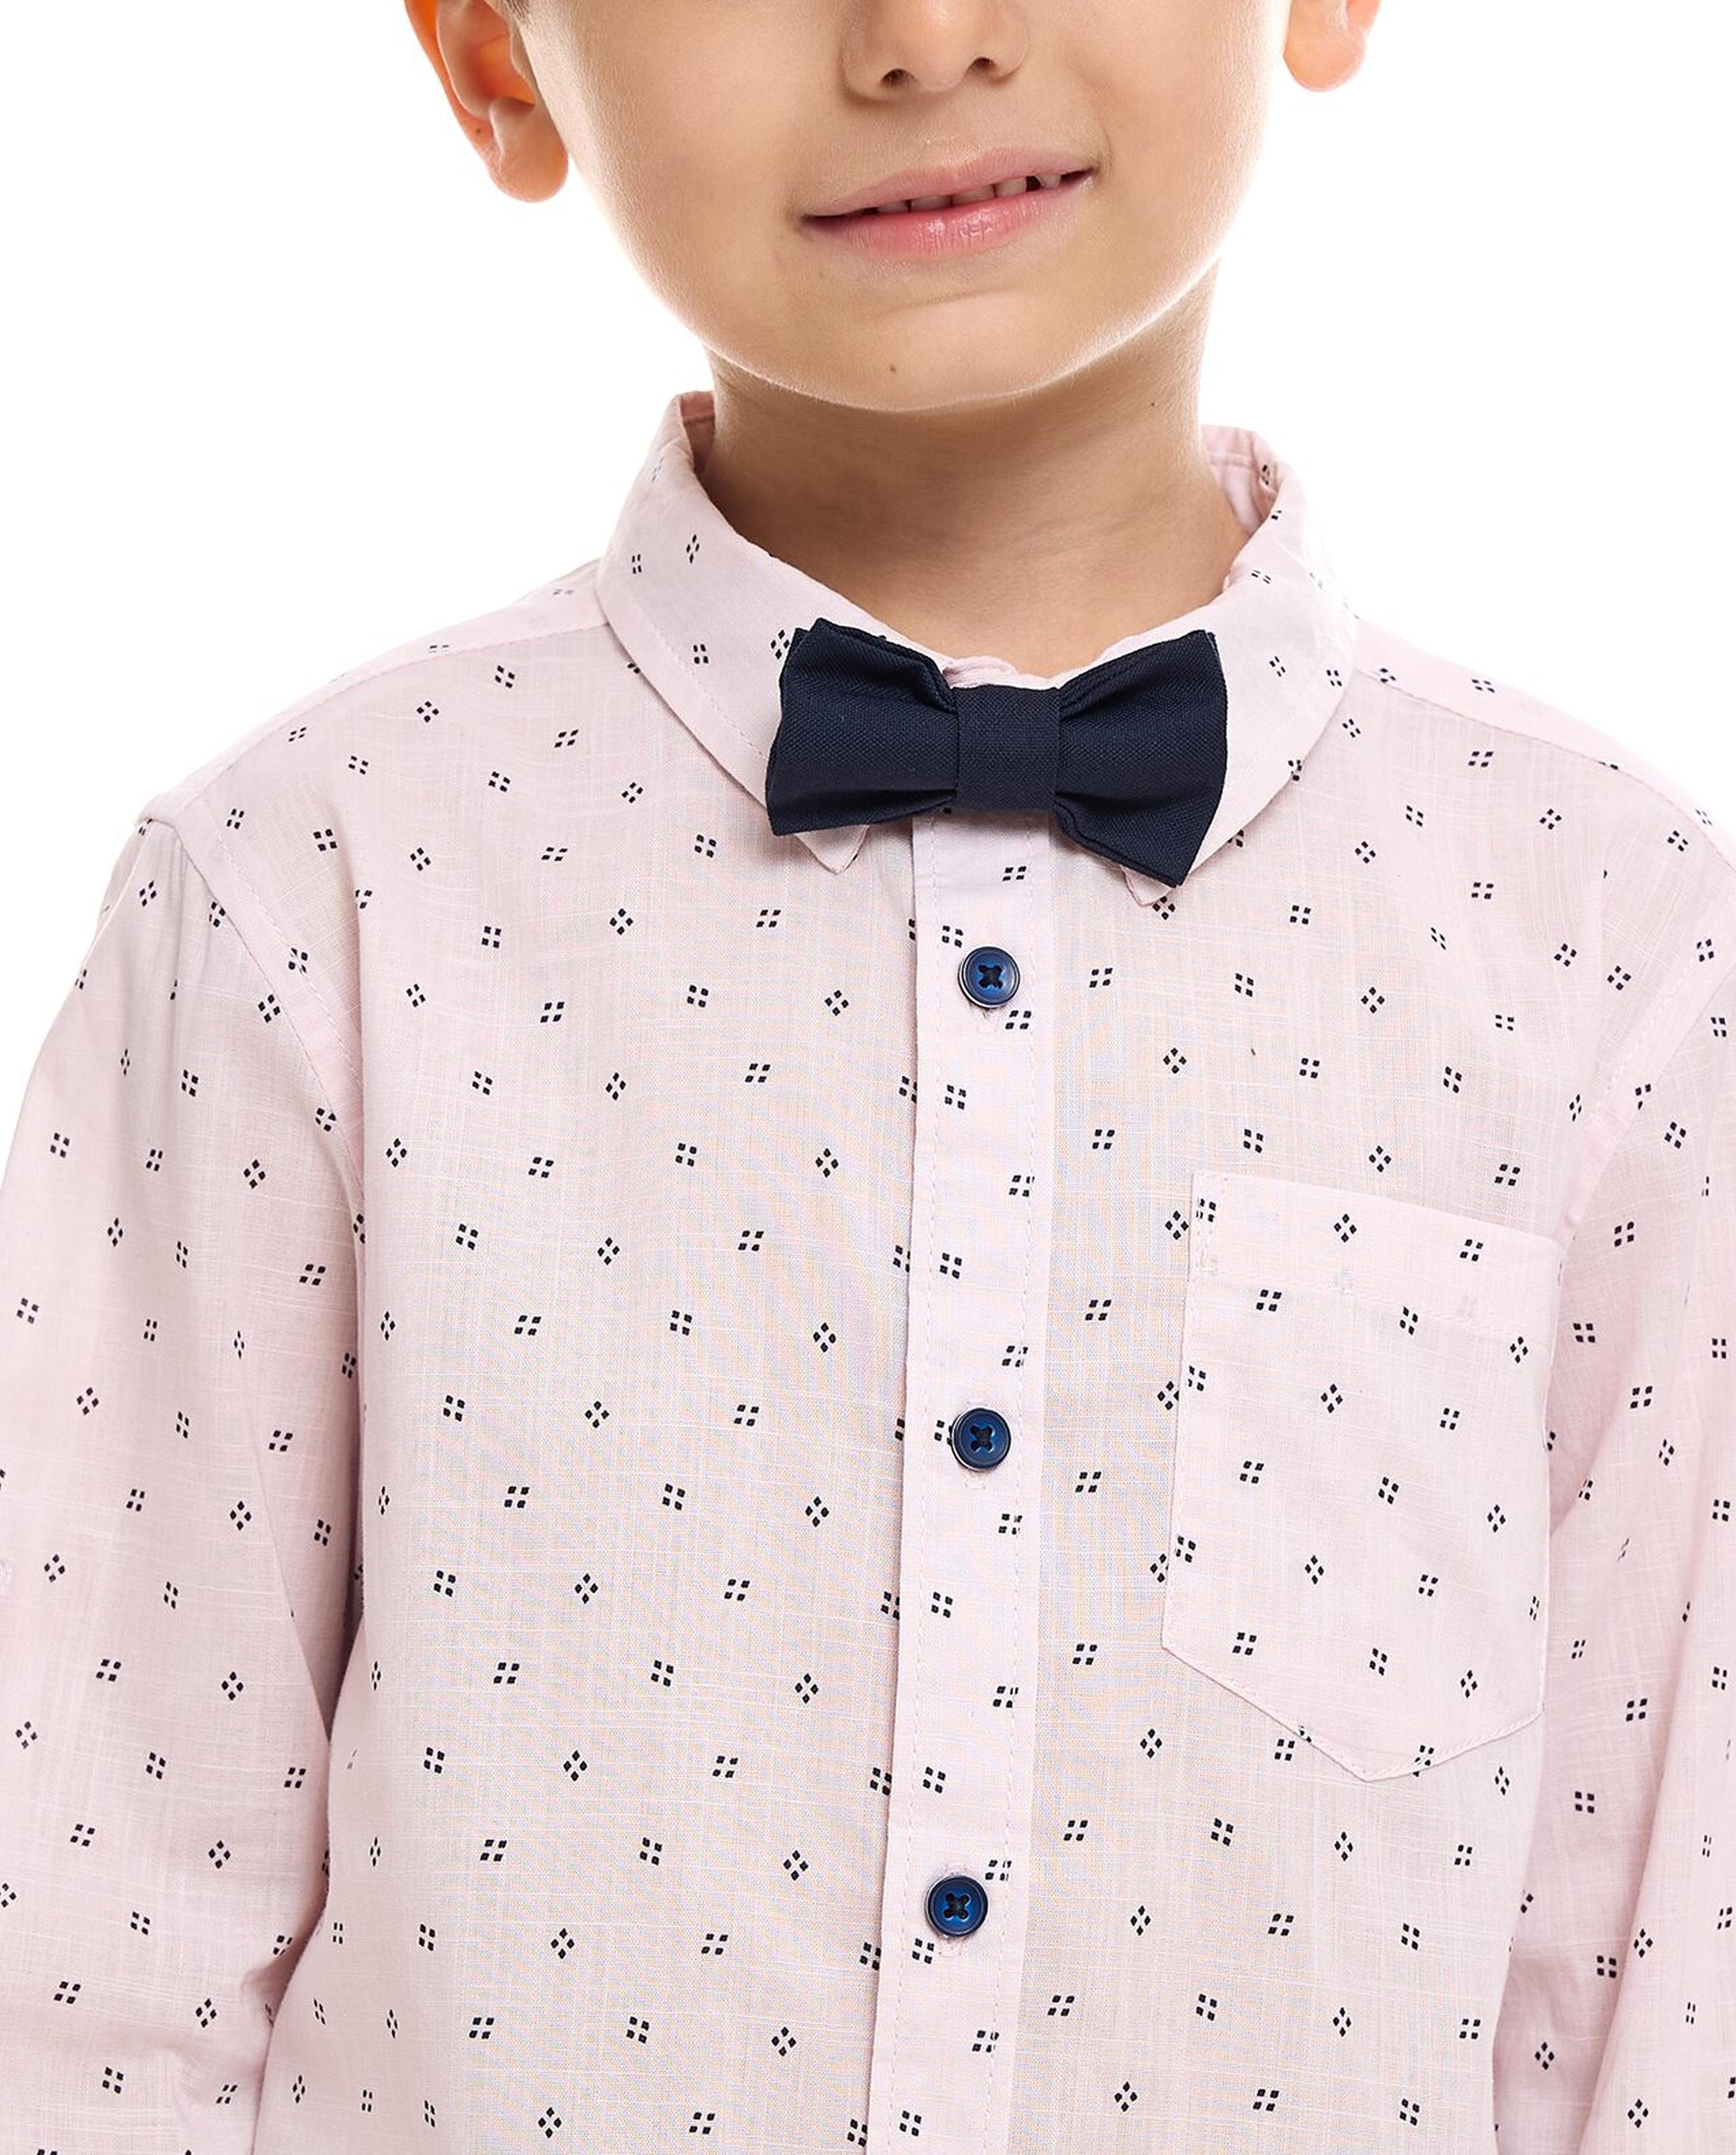 Printed Shirt with Classic Collar and Long Sleeves